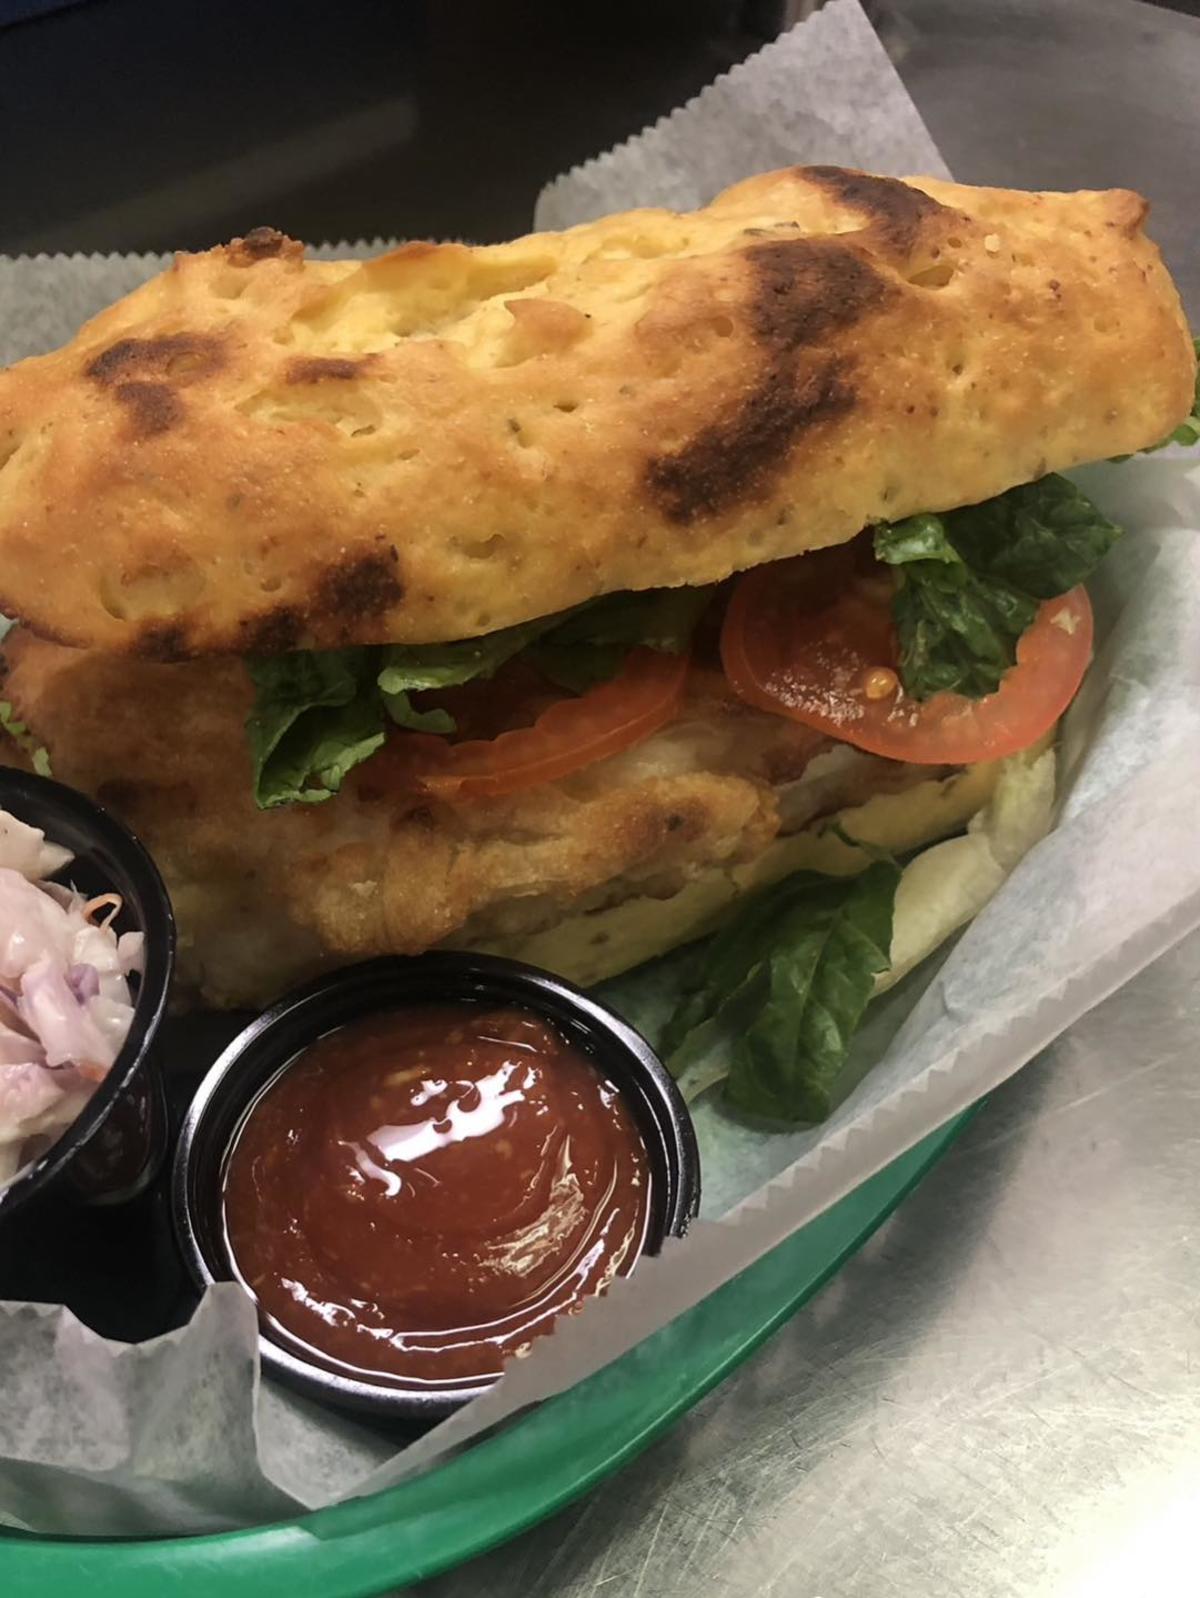 A gluten-free fish sandwich is a popular option for Lent at Little E's Pizzeria in Greensburg.